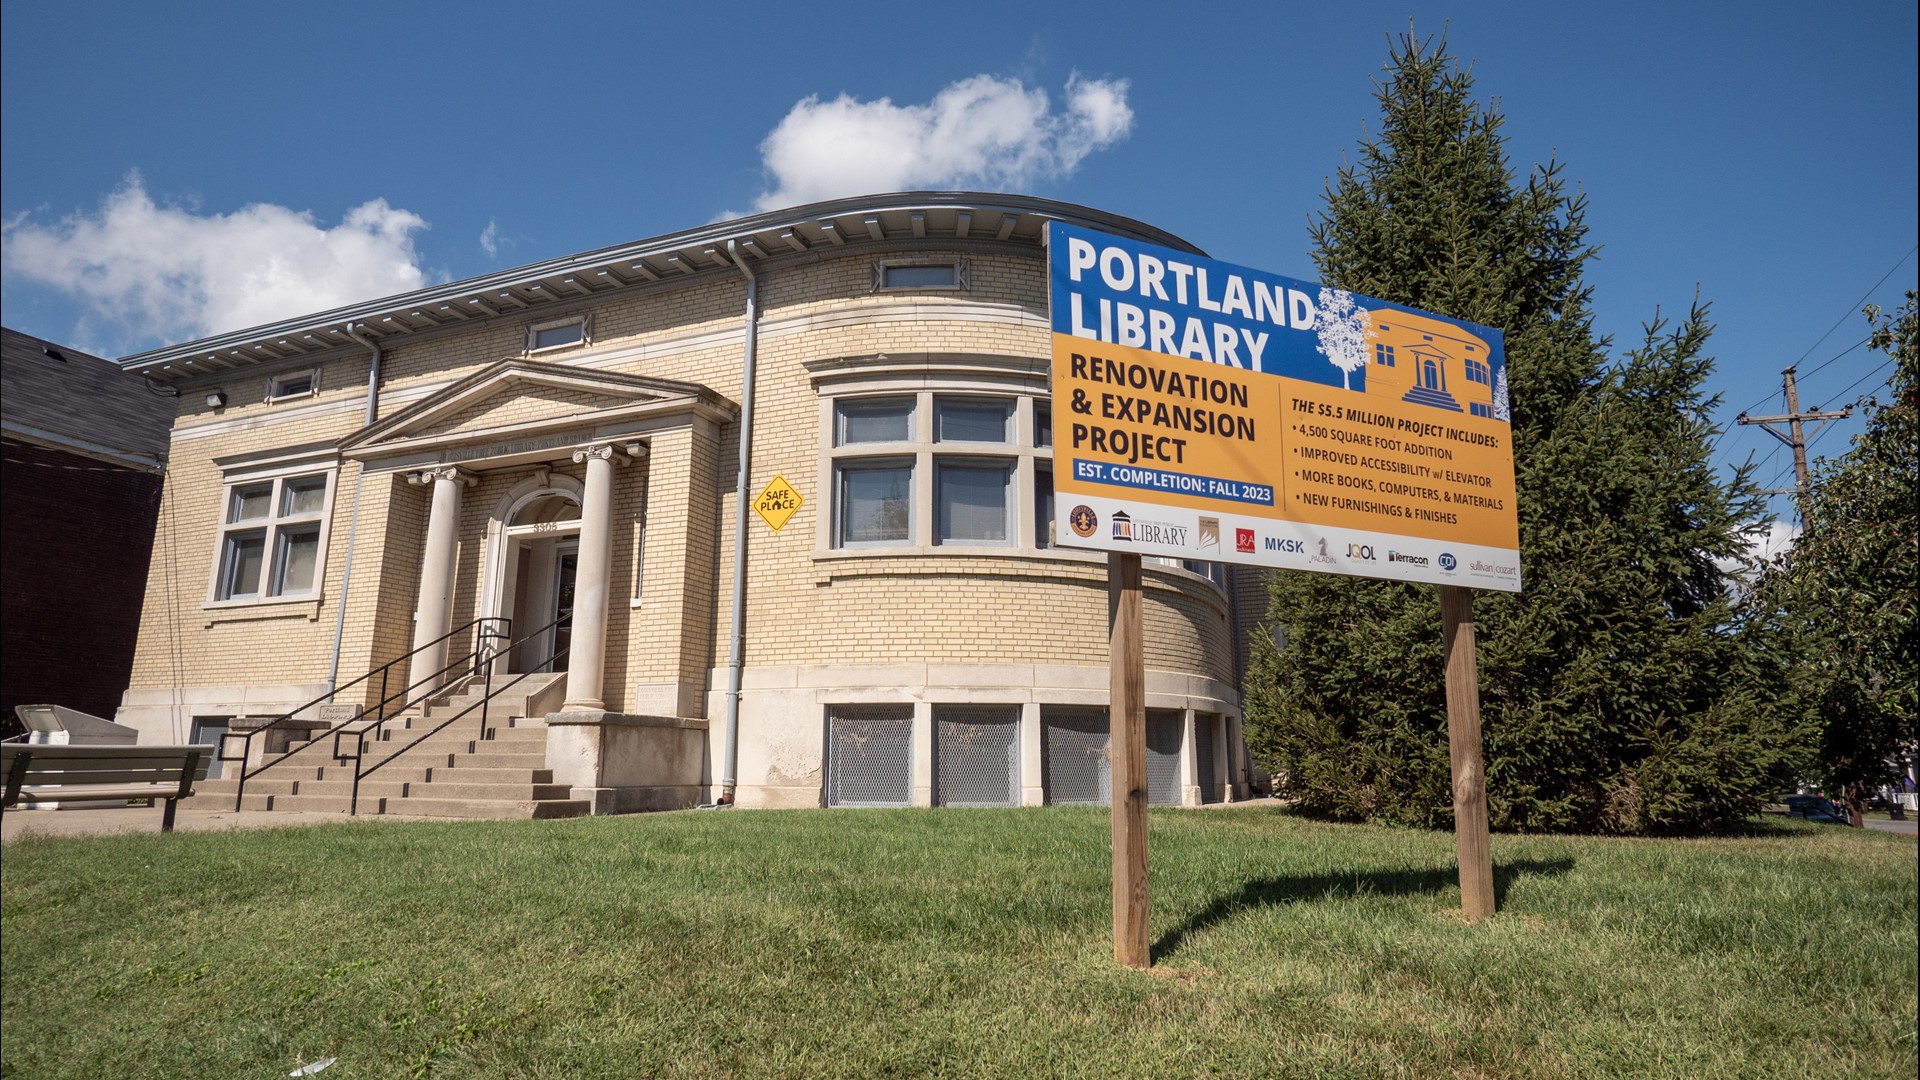 The Portland Library location opened in 1913. Construction is expected to complete in 12 to 15 months.